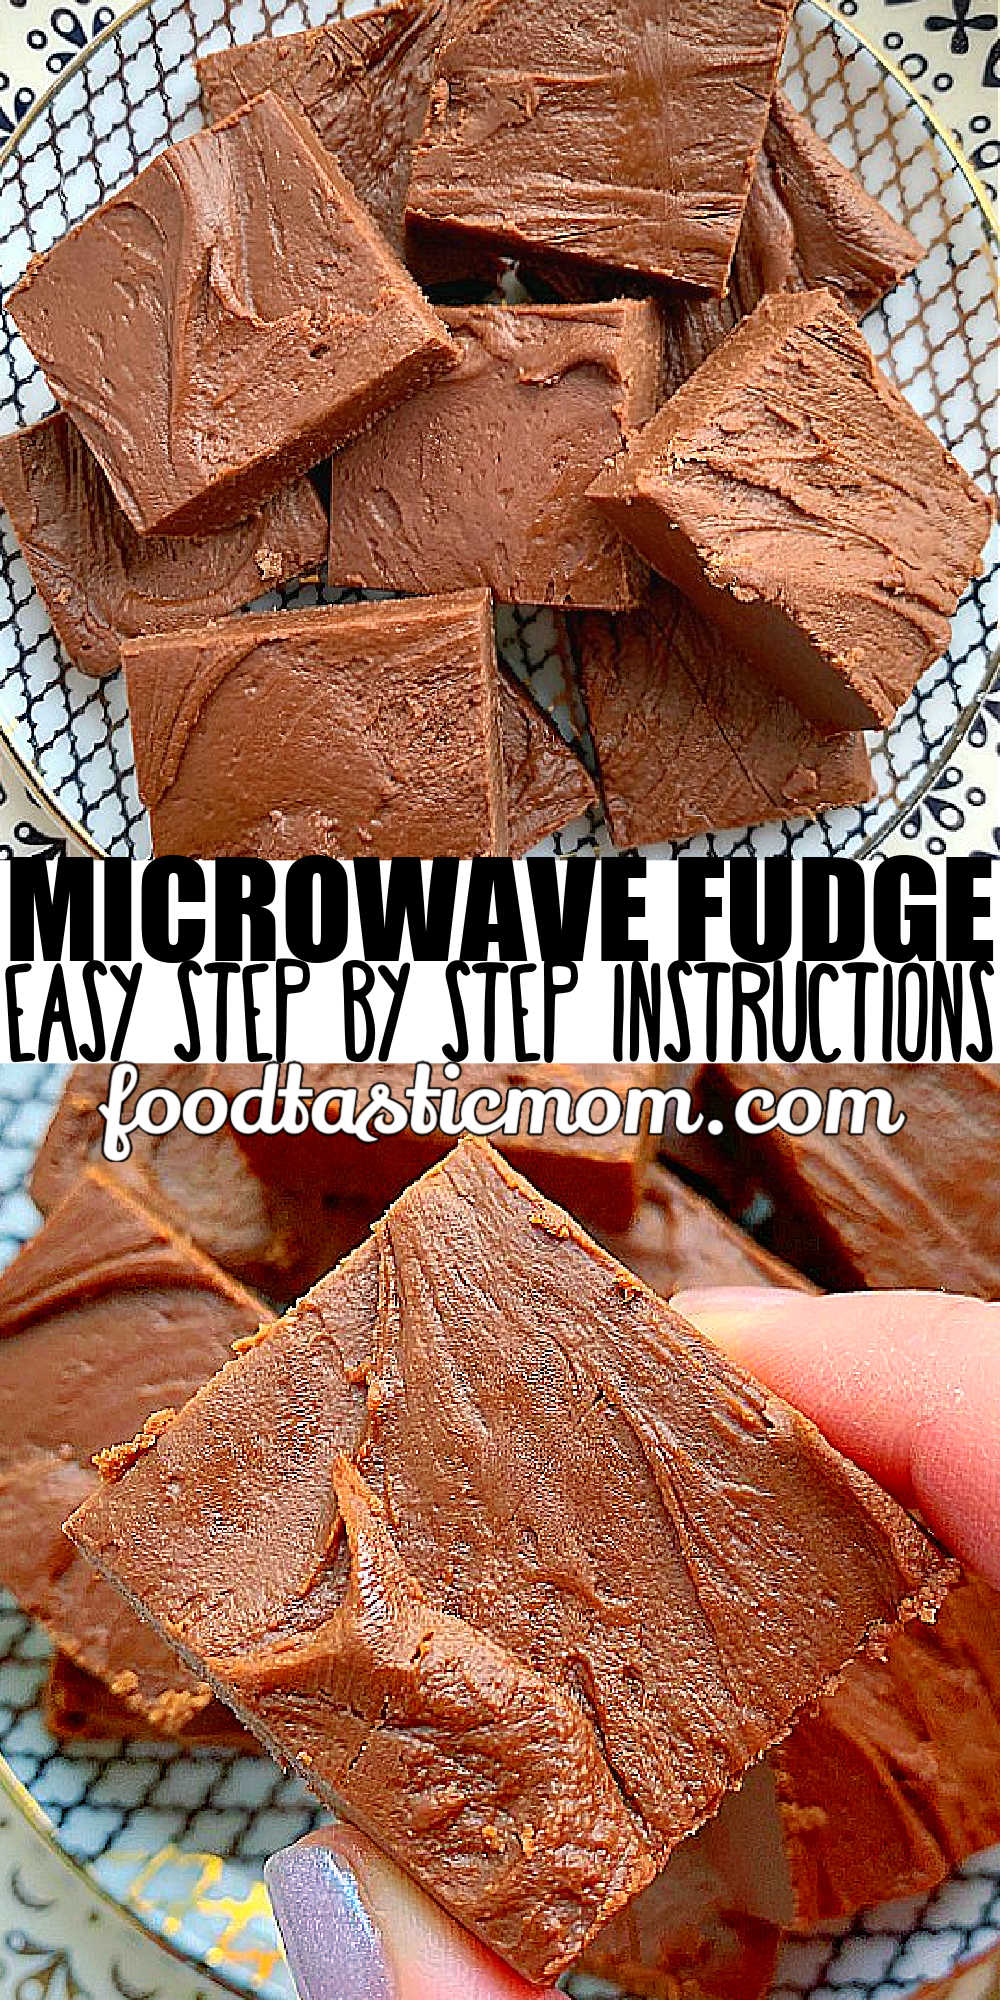 My Mom's recipe for Microwave Fudge is the best, most creamy and dreamy fudge you'll ever make. It's foolproof and customizable for gift giving. via @foodtasticmom